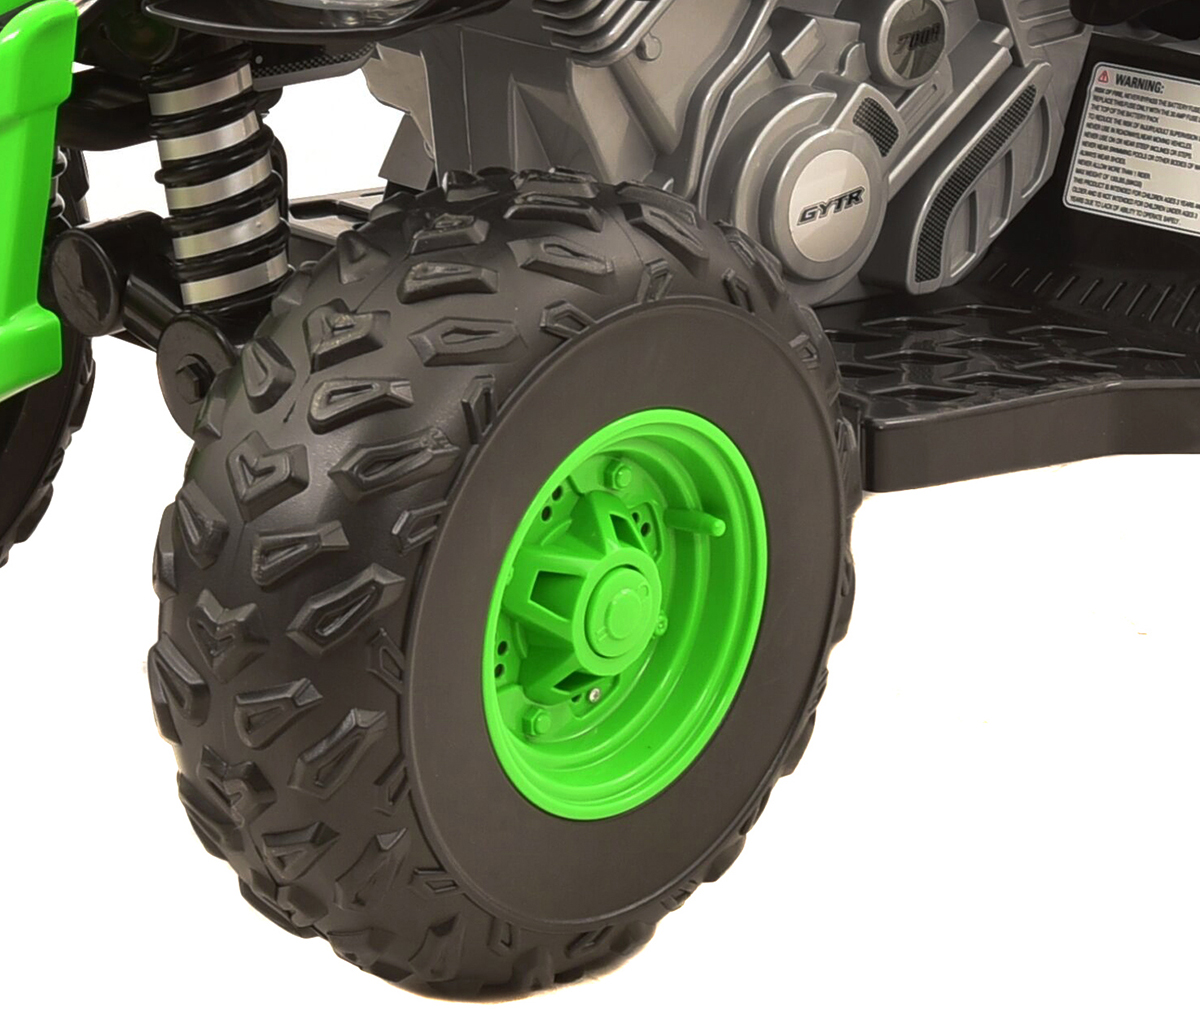 Yamaha 12 Volt Raptor Battery Powered Ride-On - New Custom Graphic Design - for Boys & Girls Ages 3 and up - image 3 of 9